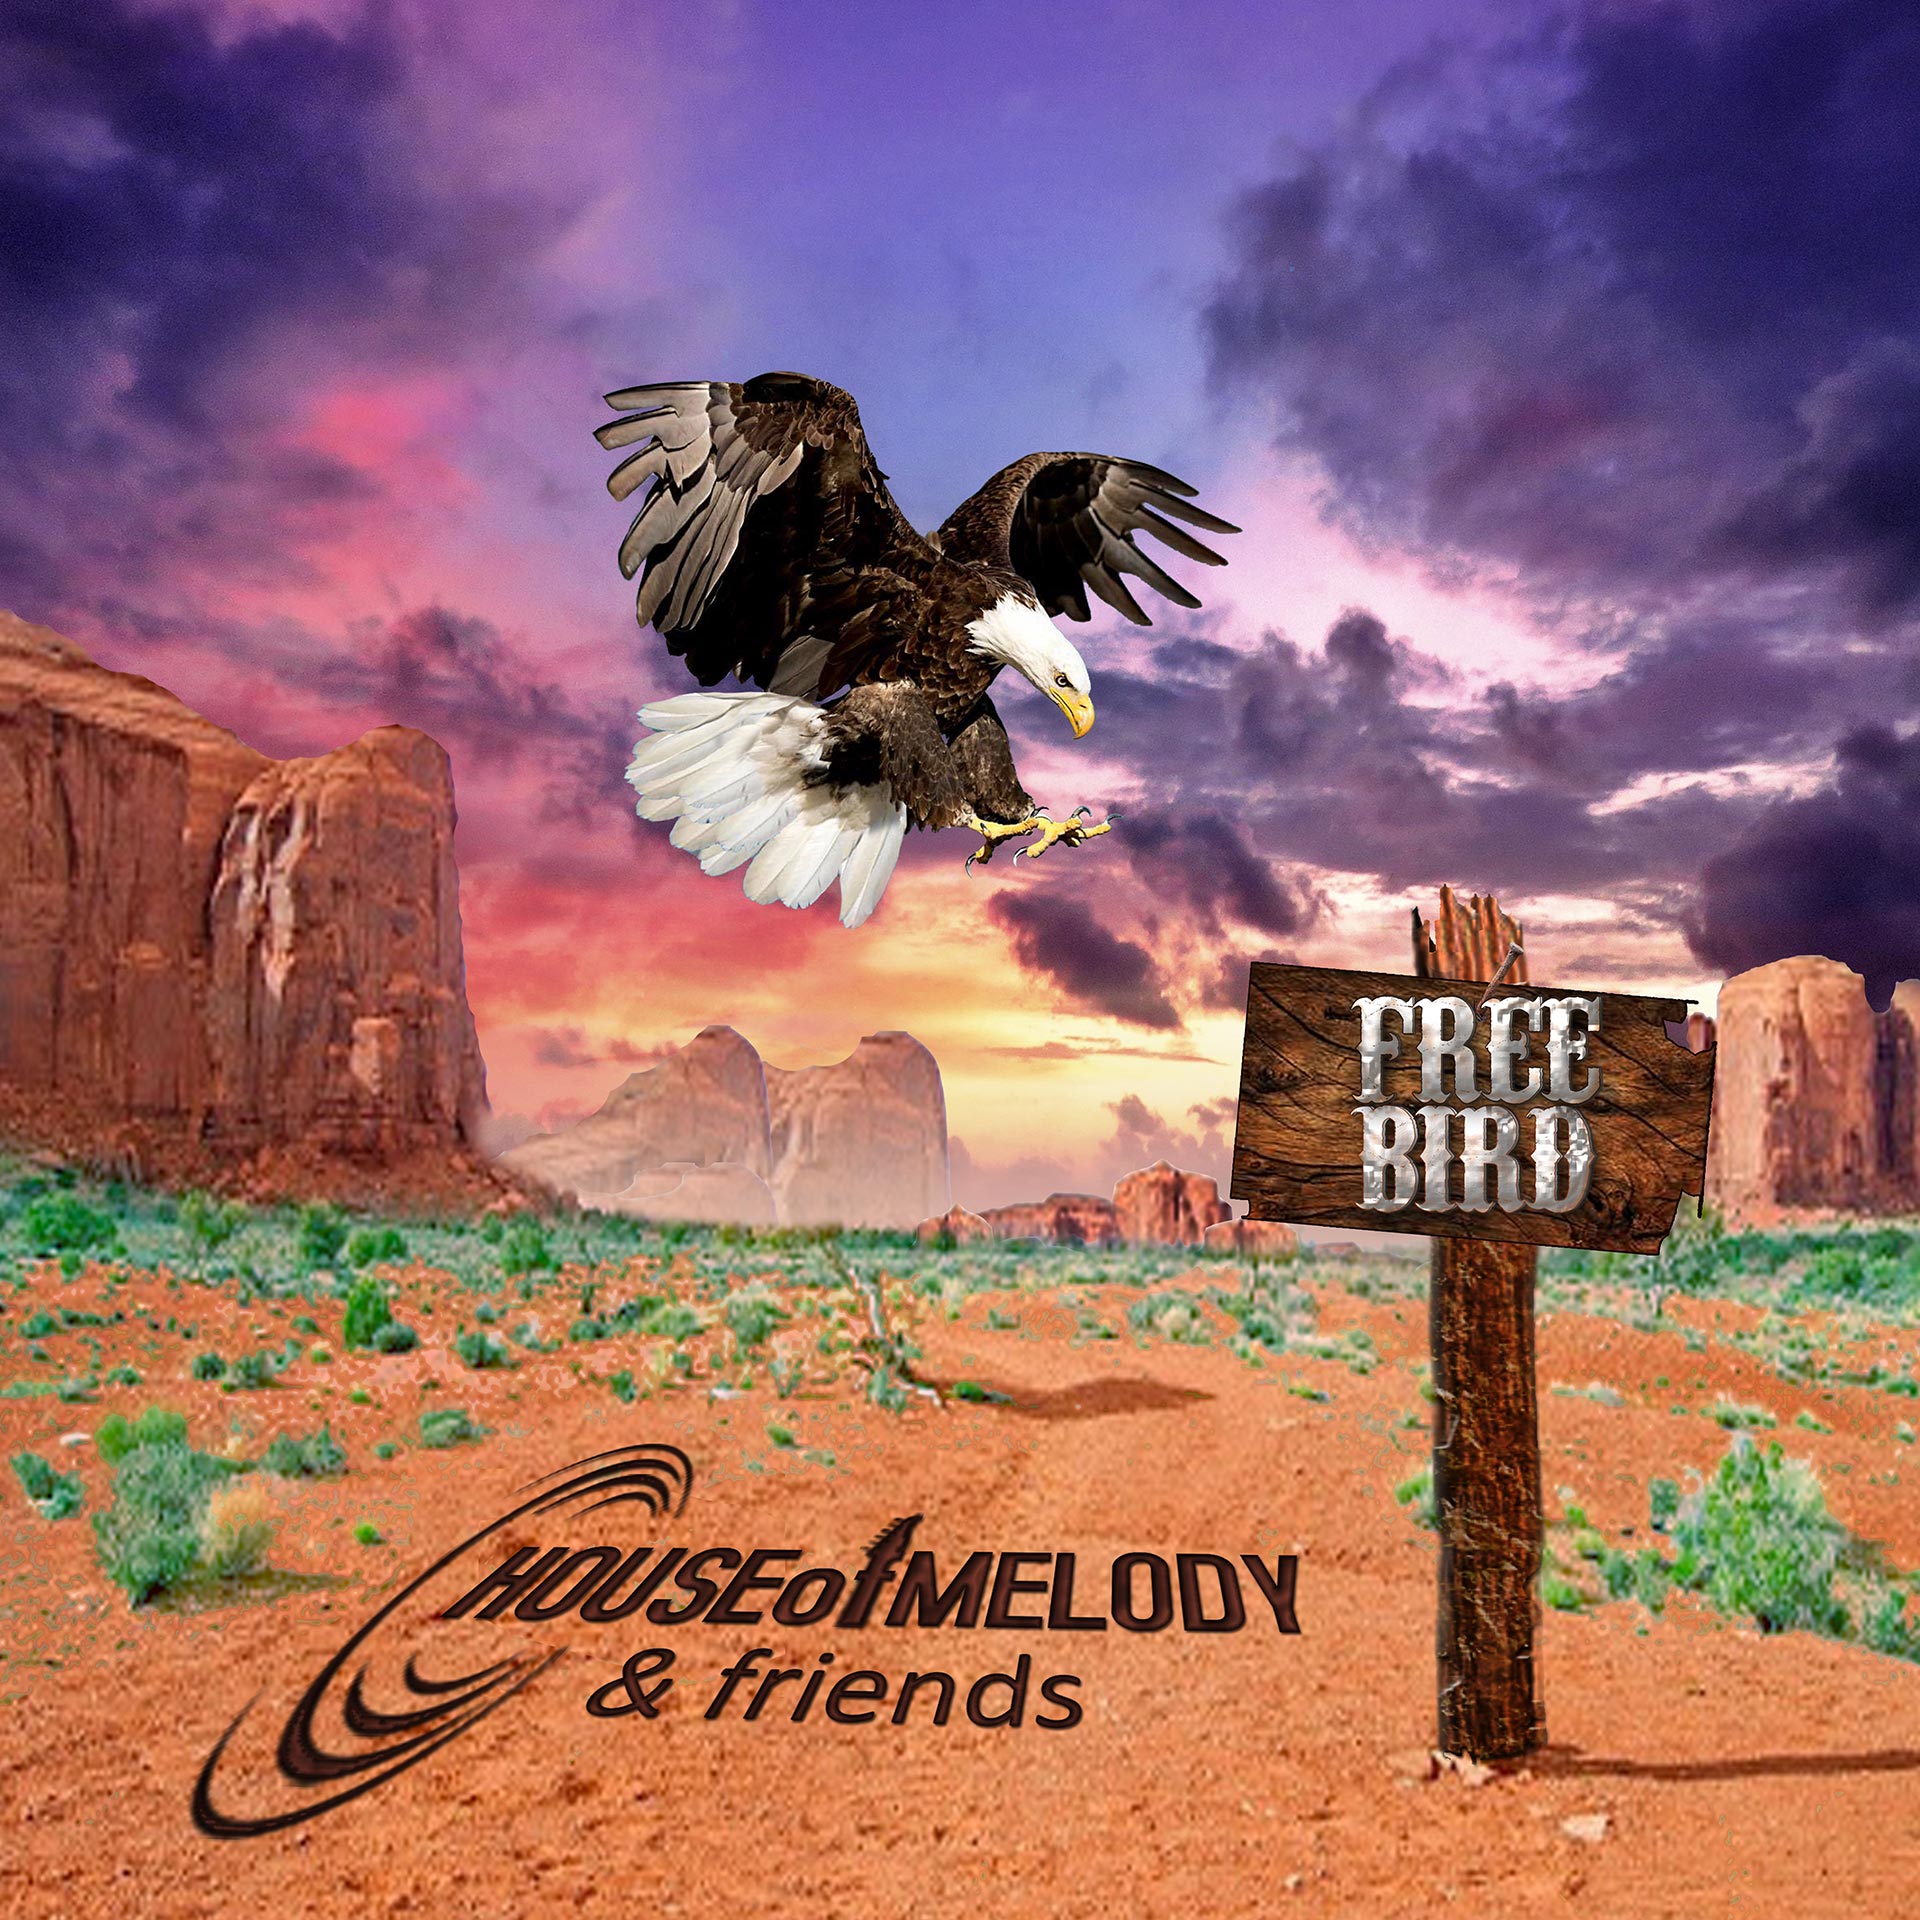 New ‘Free Bird’ Charity Single Mixed and Mastered by GRAMMY® Winner Emily Lazar